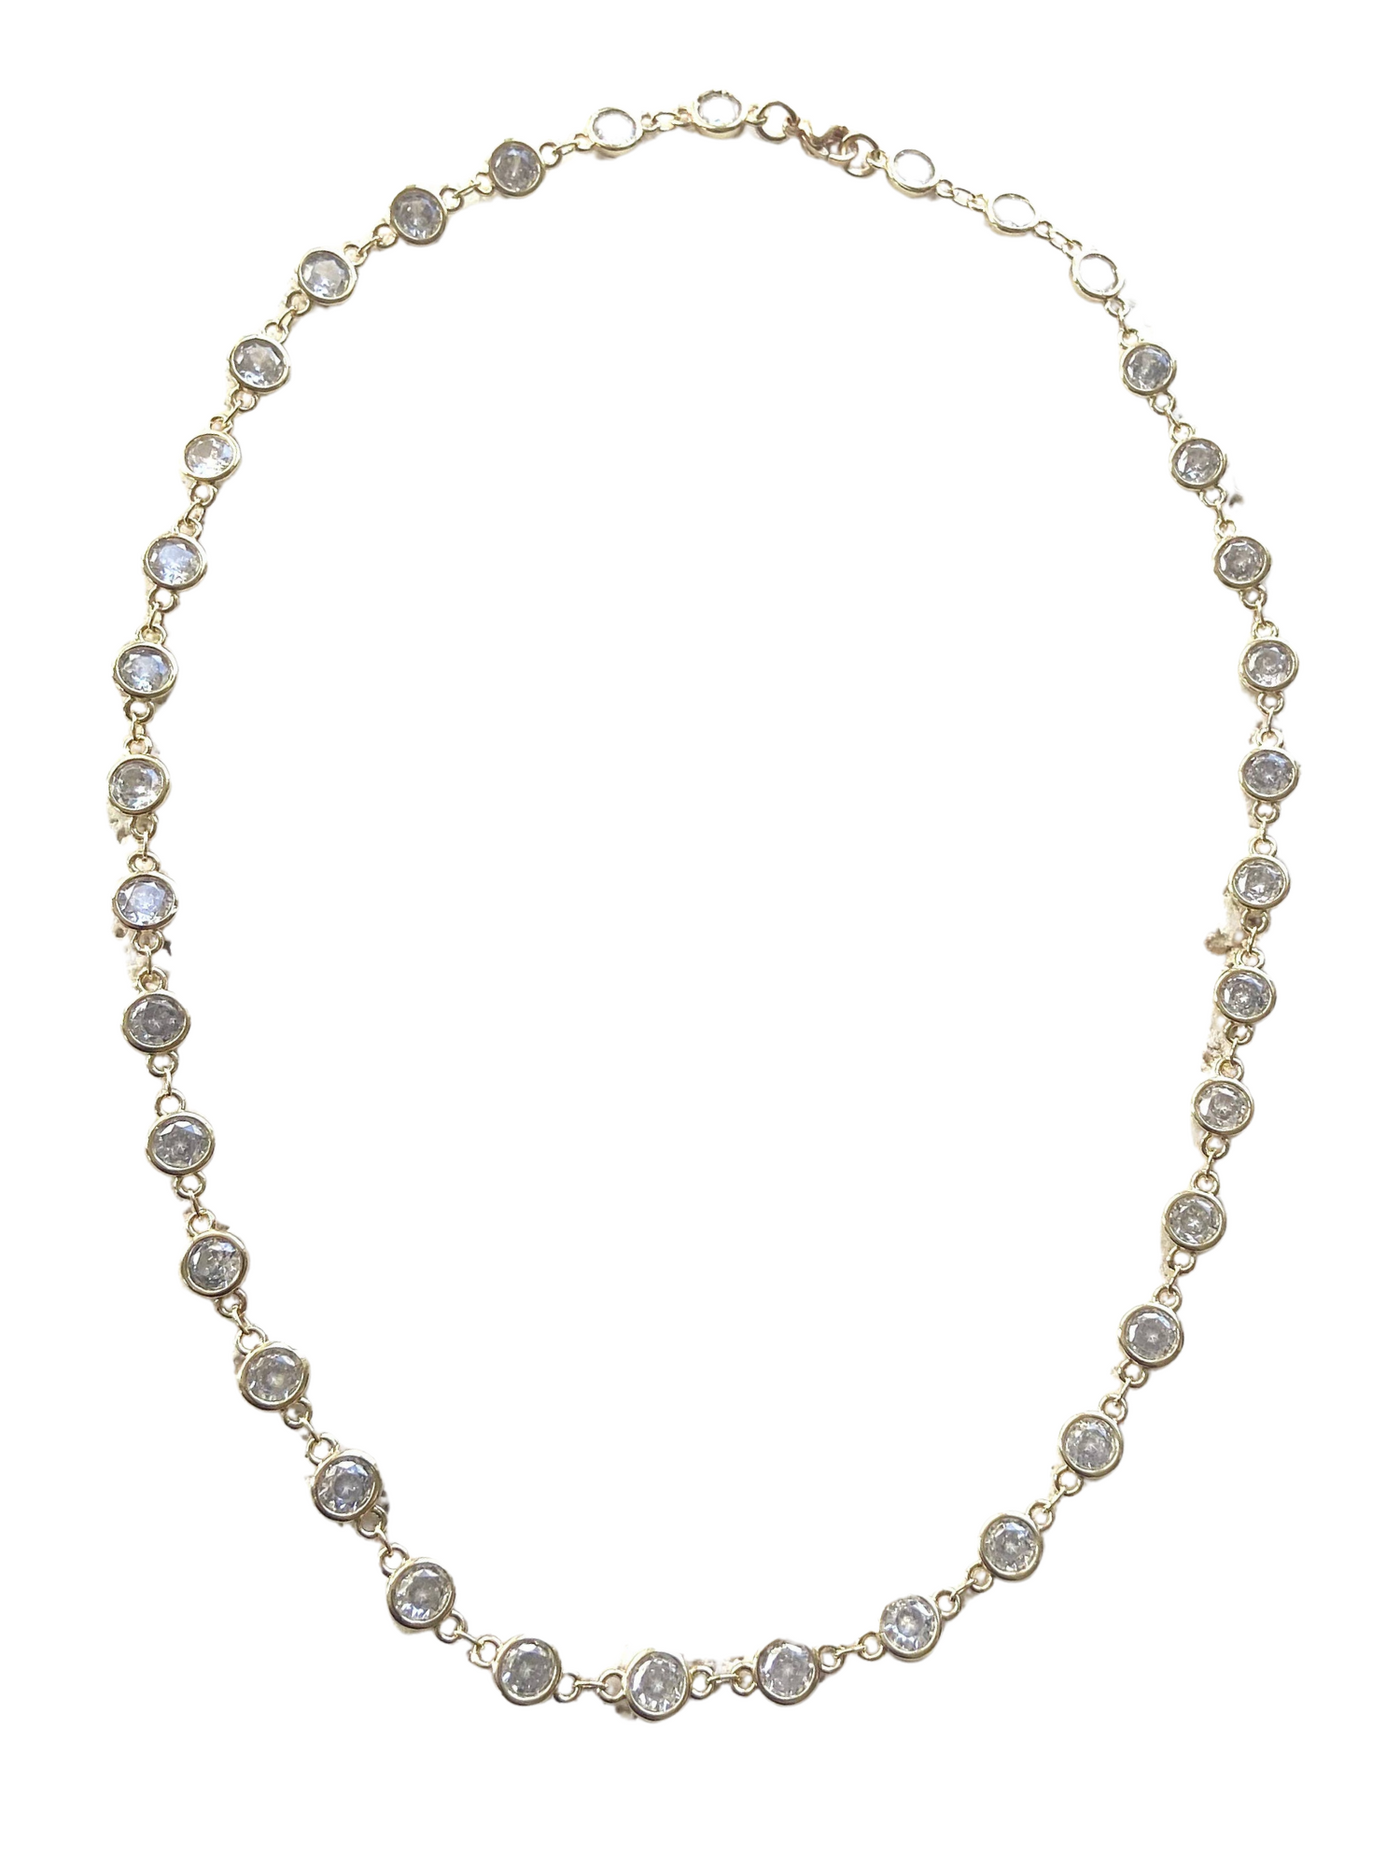 VB&CO Designs Handmade Jewelry Crystal Layering Necklace - Gold